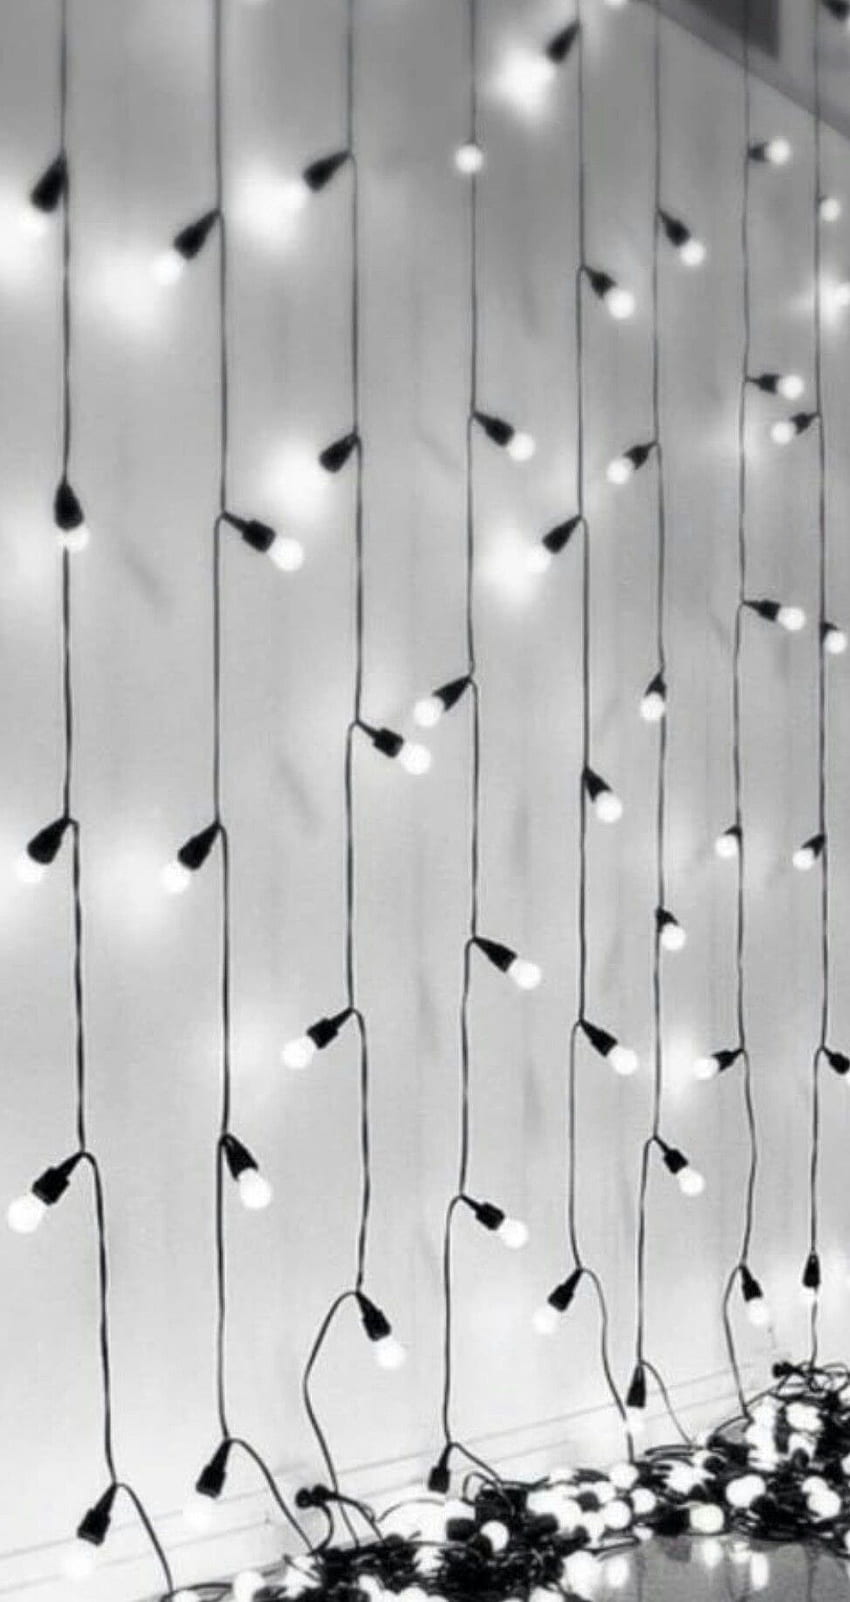 Black and white lights hanging from the ceiling - Silver